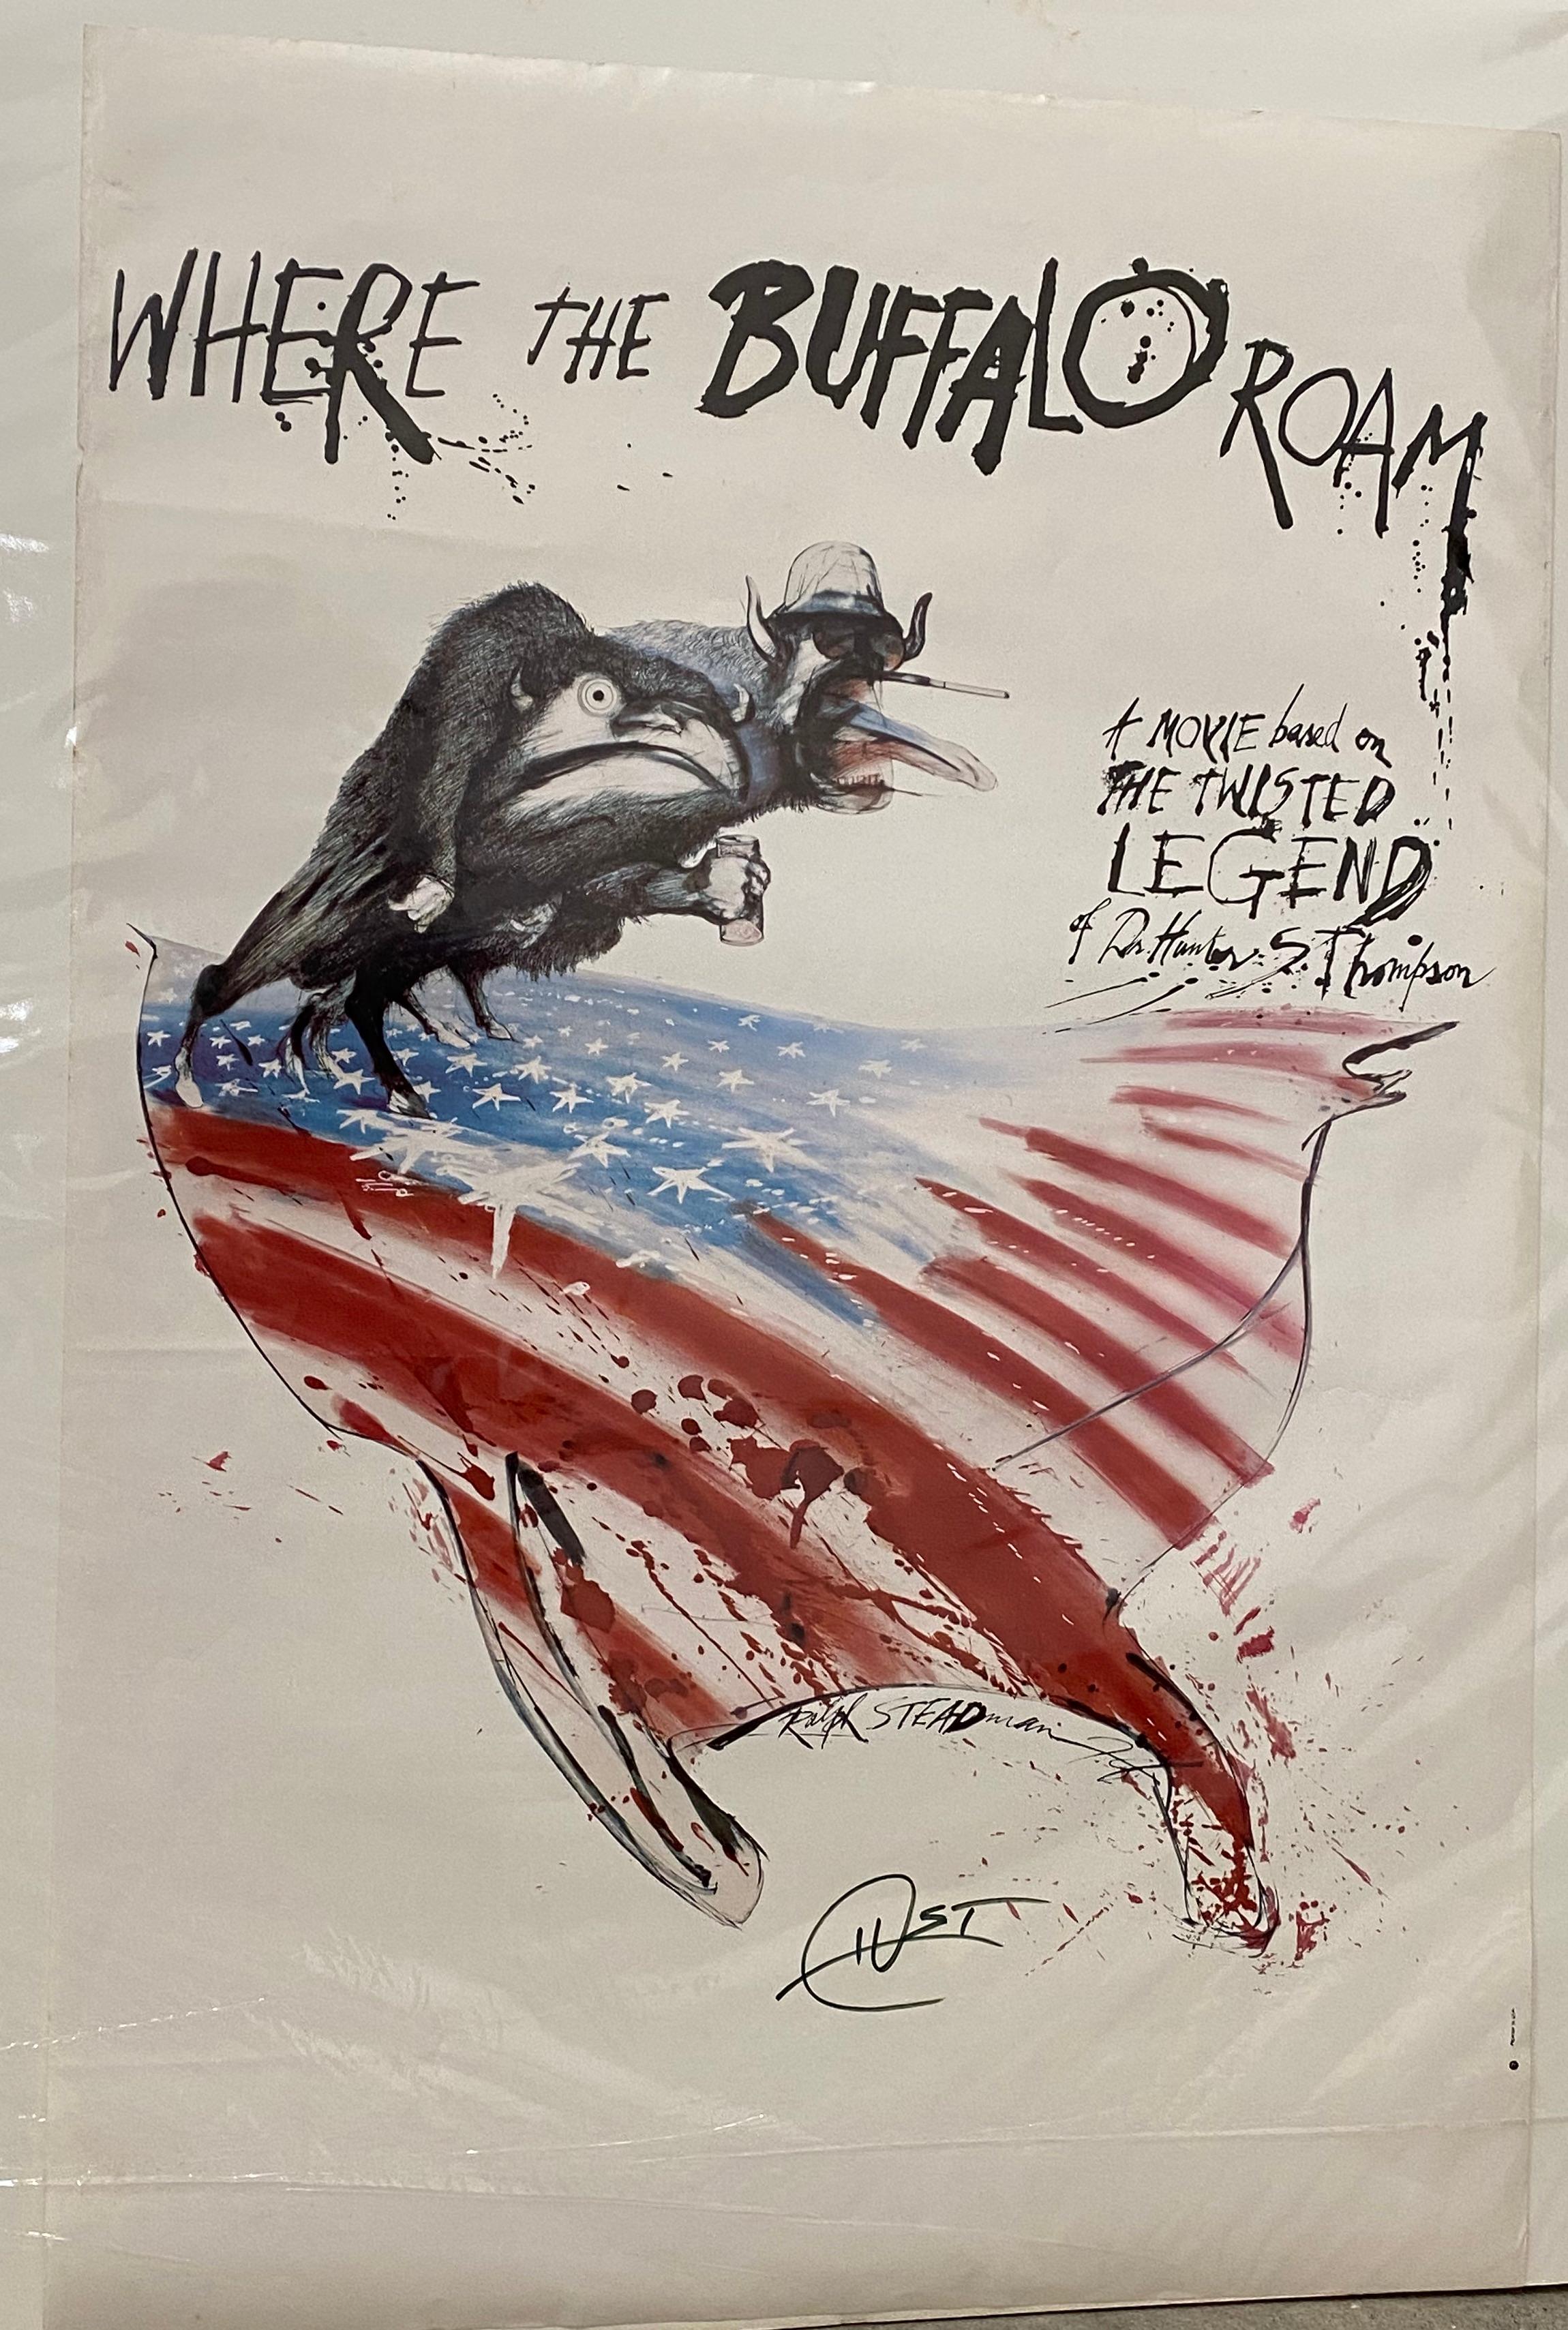 Ralph Steadman Abstract Print - Where The Buffalo Roam Poster Signed by Hunter S. Thompson 